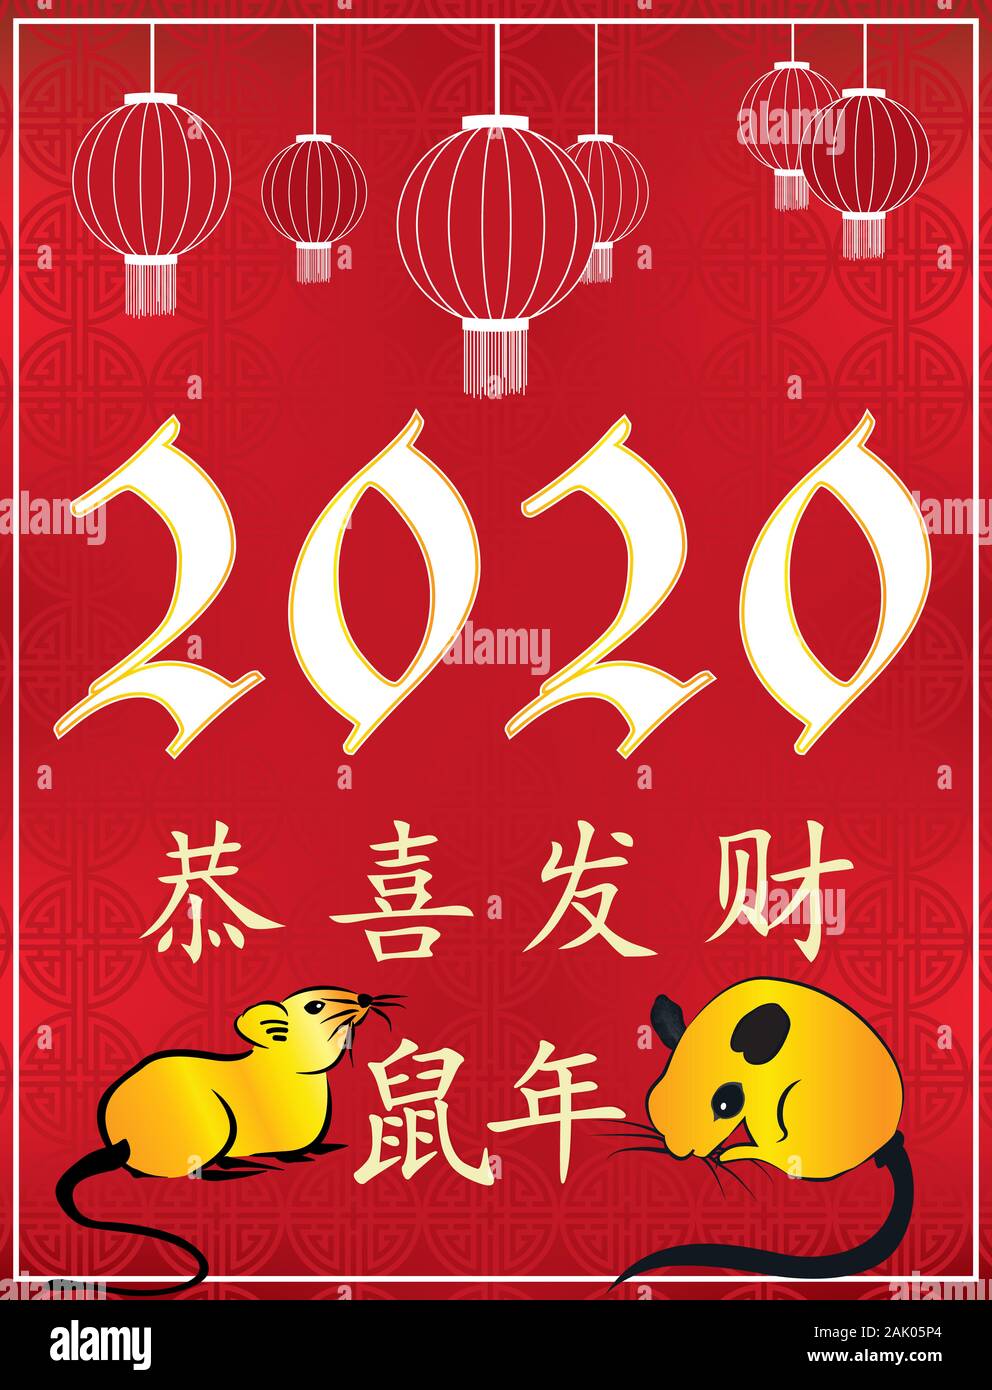 Vintage-style greeting card - Happy Chinese New Year of the Rat 2020! Ideograms translation: Congratulations and make fortune. Year of the Rat. Stock Photo